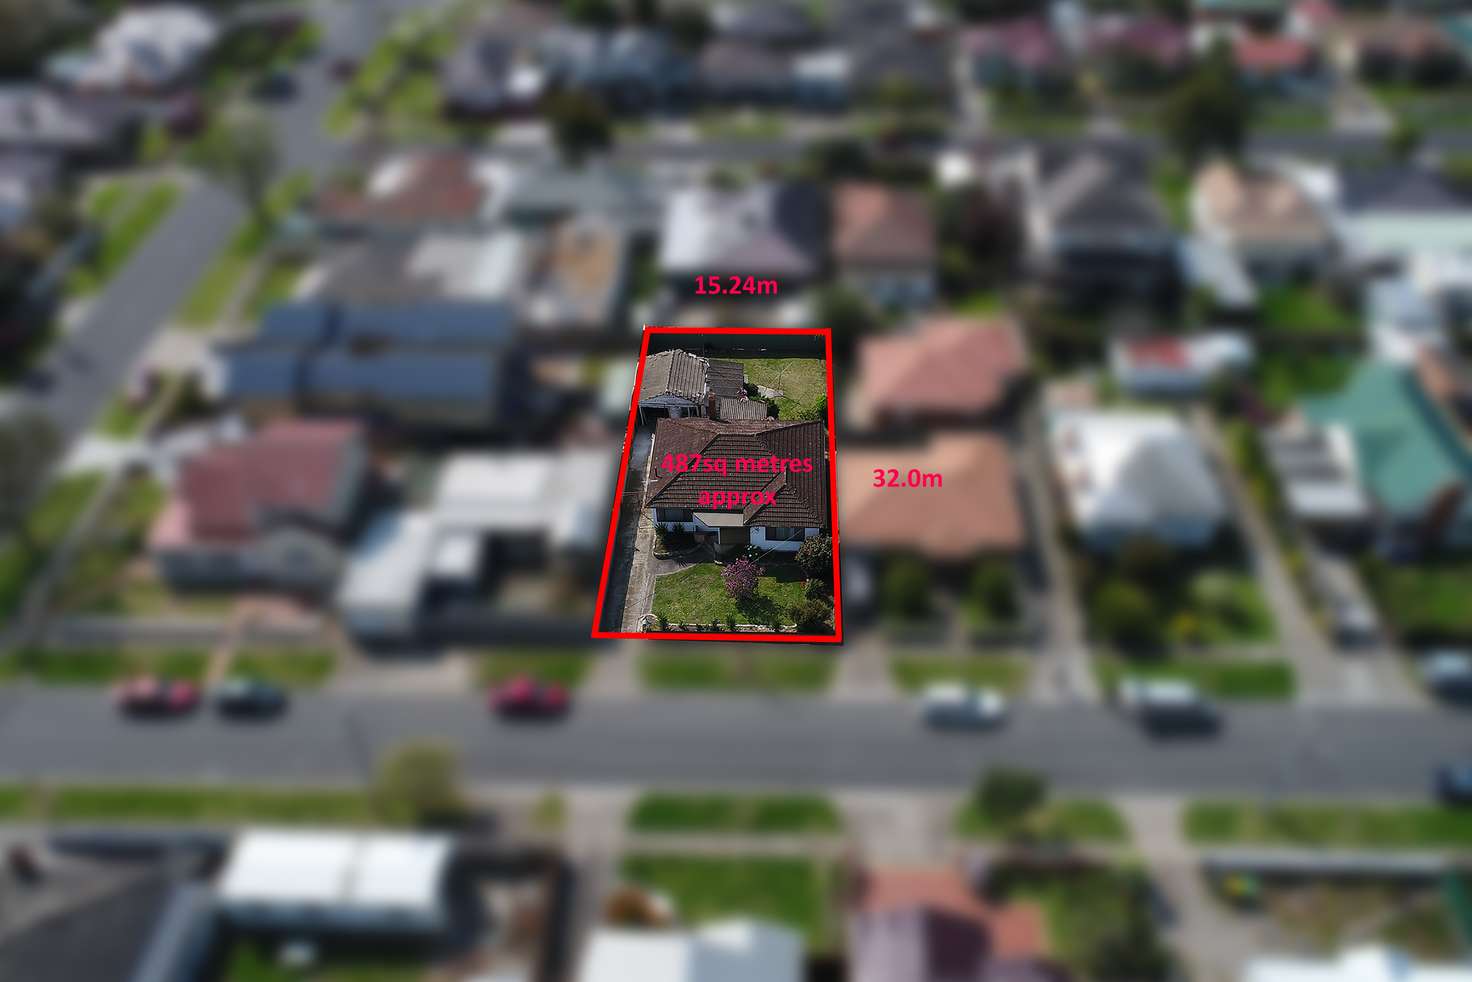 Main view of Homely house listing, 34 Union Street, Sunshine VIC 3020